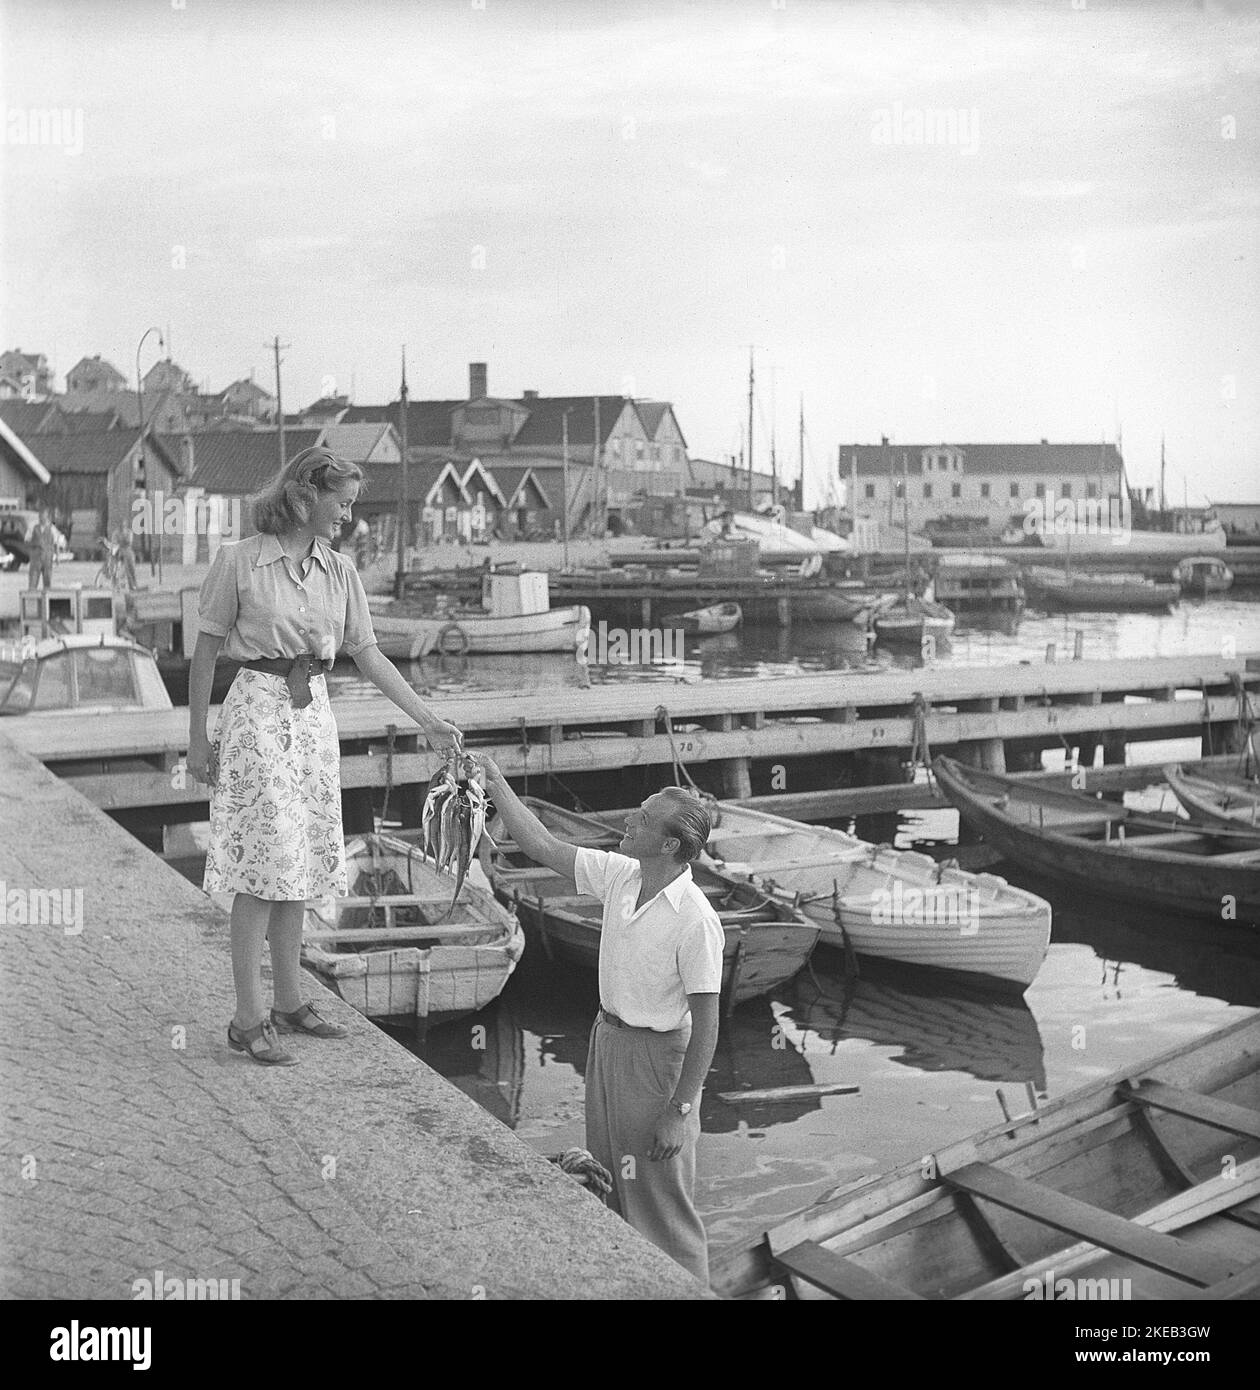 In the 1940s. A scene taken during the filming of a movie in Bohuslän Sweden. They shy fisherman played by Olle Tärna gives the girl of his dreams fish. A kind of courtship that might have lead to a romance. Sweden 1947. Kristoffersson AD1-10 Stock Photo